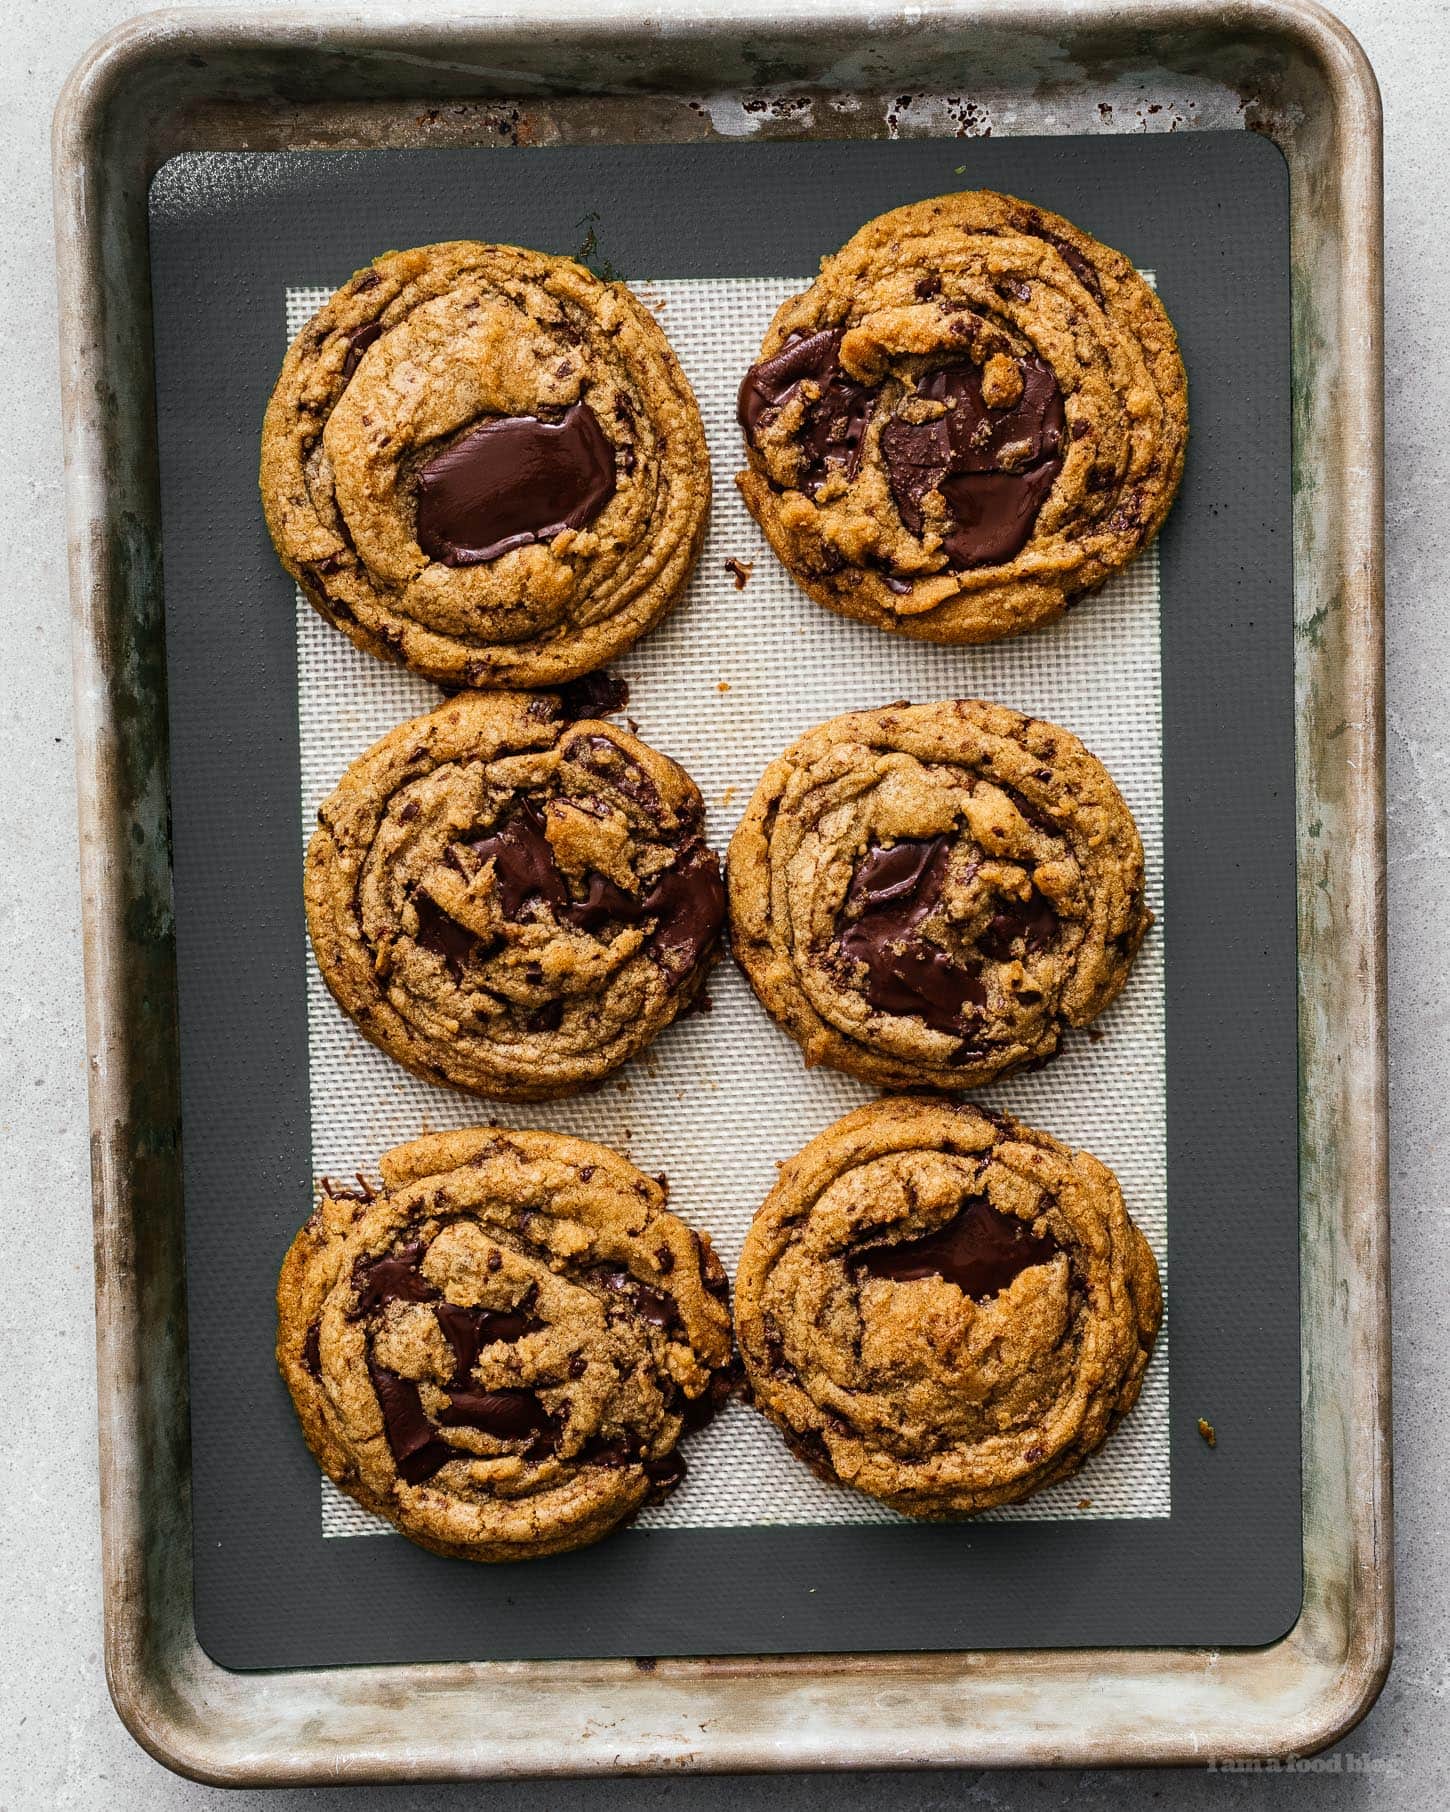 These rippled salted brown butter chocolate chip cookies are to die for: soft and chewy with pools of dark chocolate, crisp edges, and the salty nuttiness of browned butter. No mixer needed – it’s going to be your new fave! #brownedbutter #brownbutter #chocolatechipcookies #chocolatechipcookierecipe #recipes #cookies